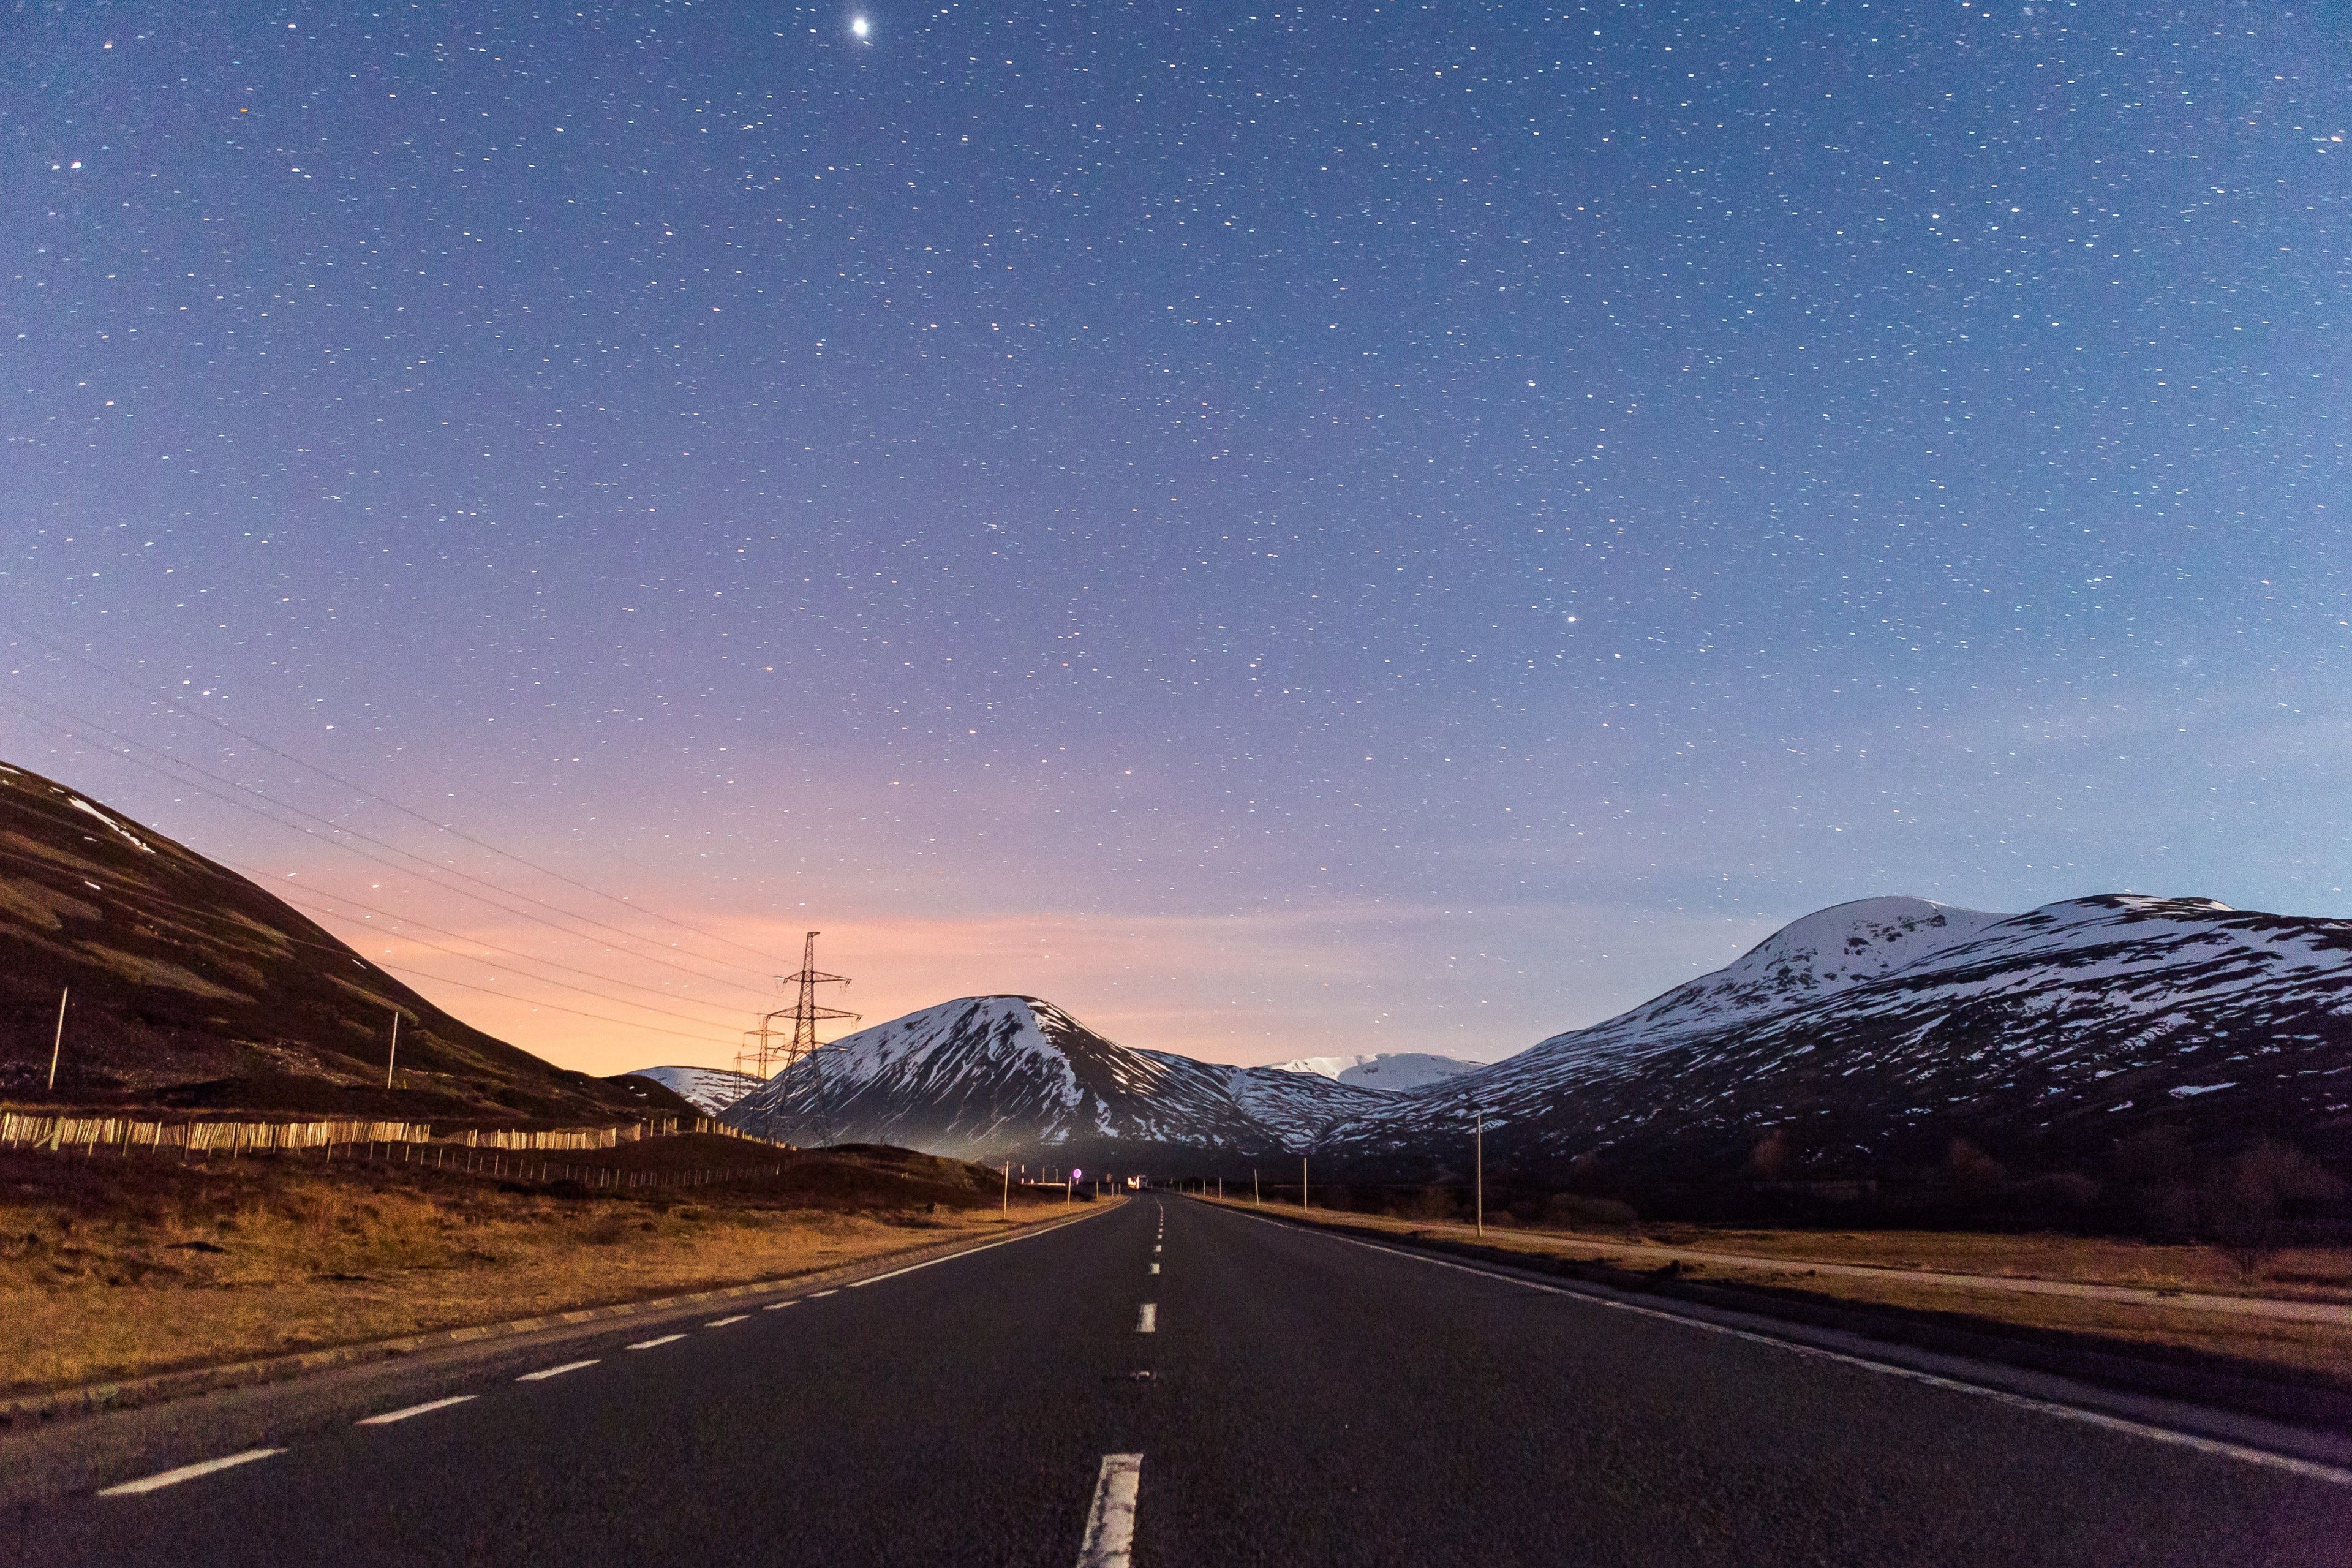 mountain road star and night sky HD 4k wallpaper and background